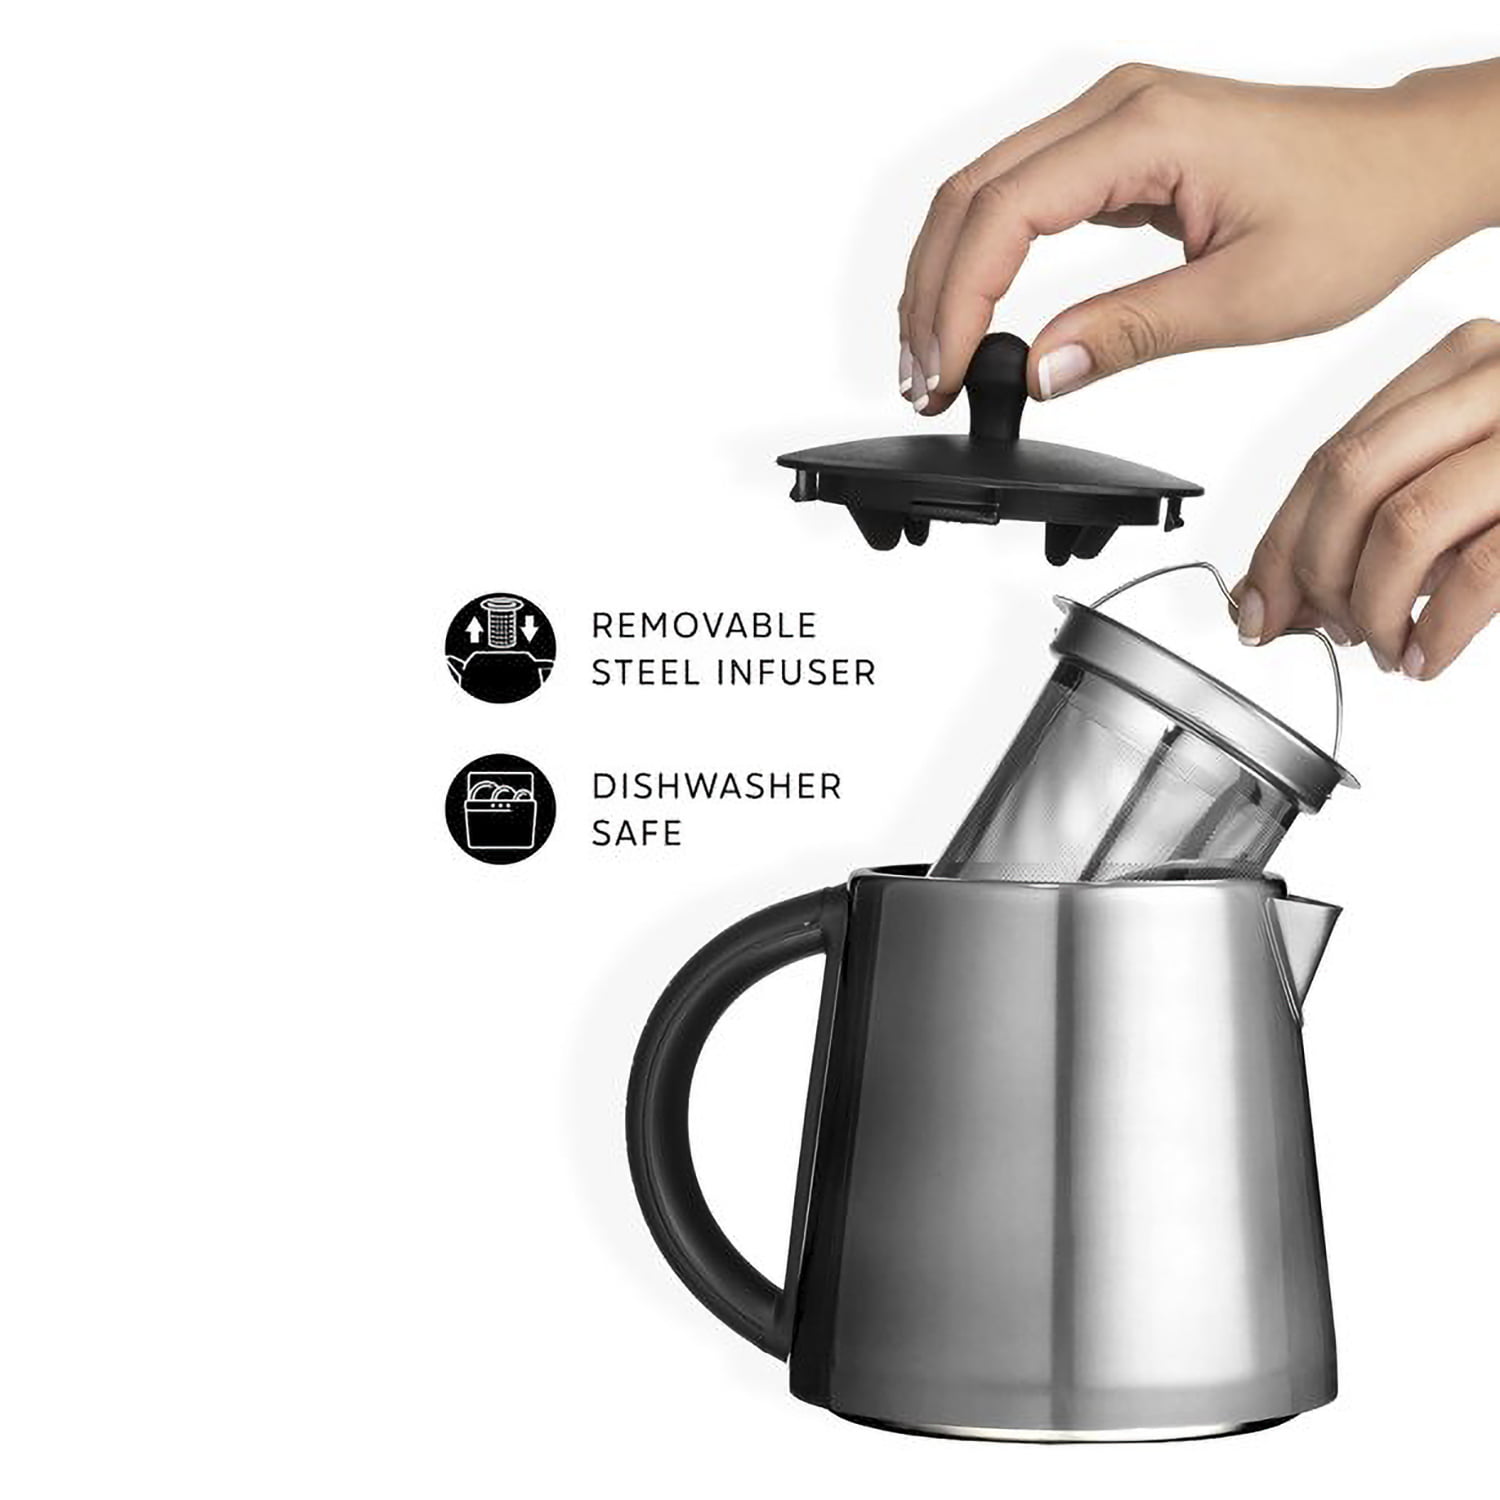 Review of #SAKI PRODUCTS TeaSmart® Electric Turkish Tea Kettle by Torey,  1116 votes